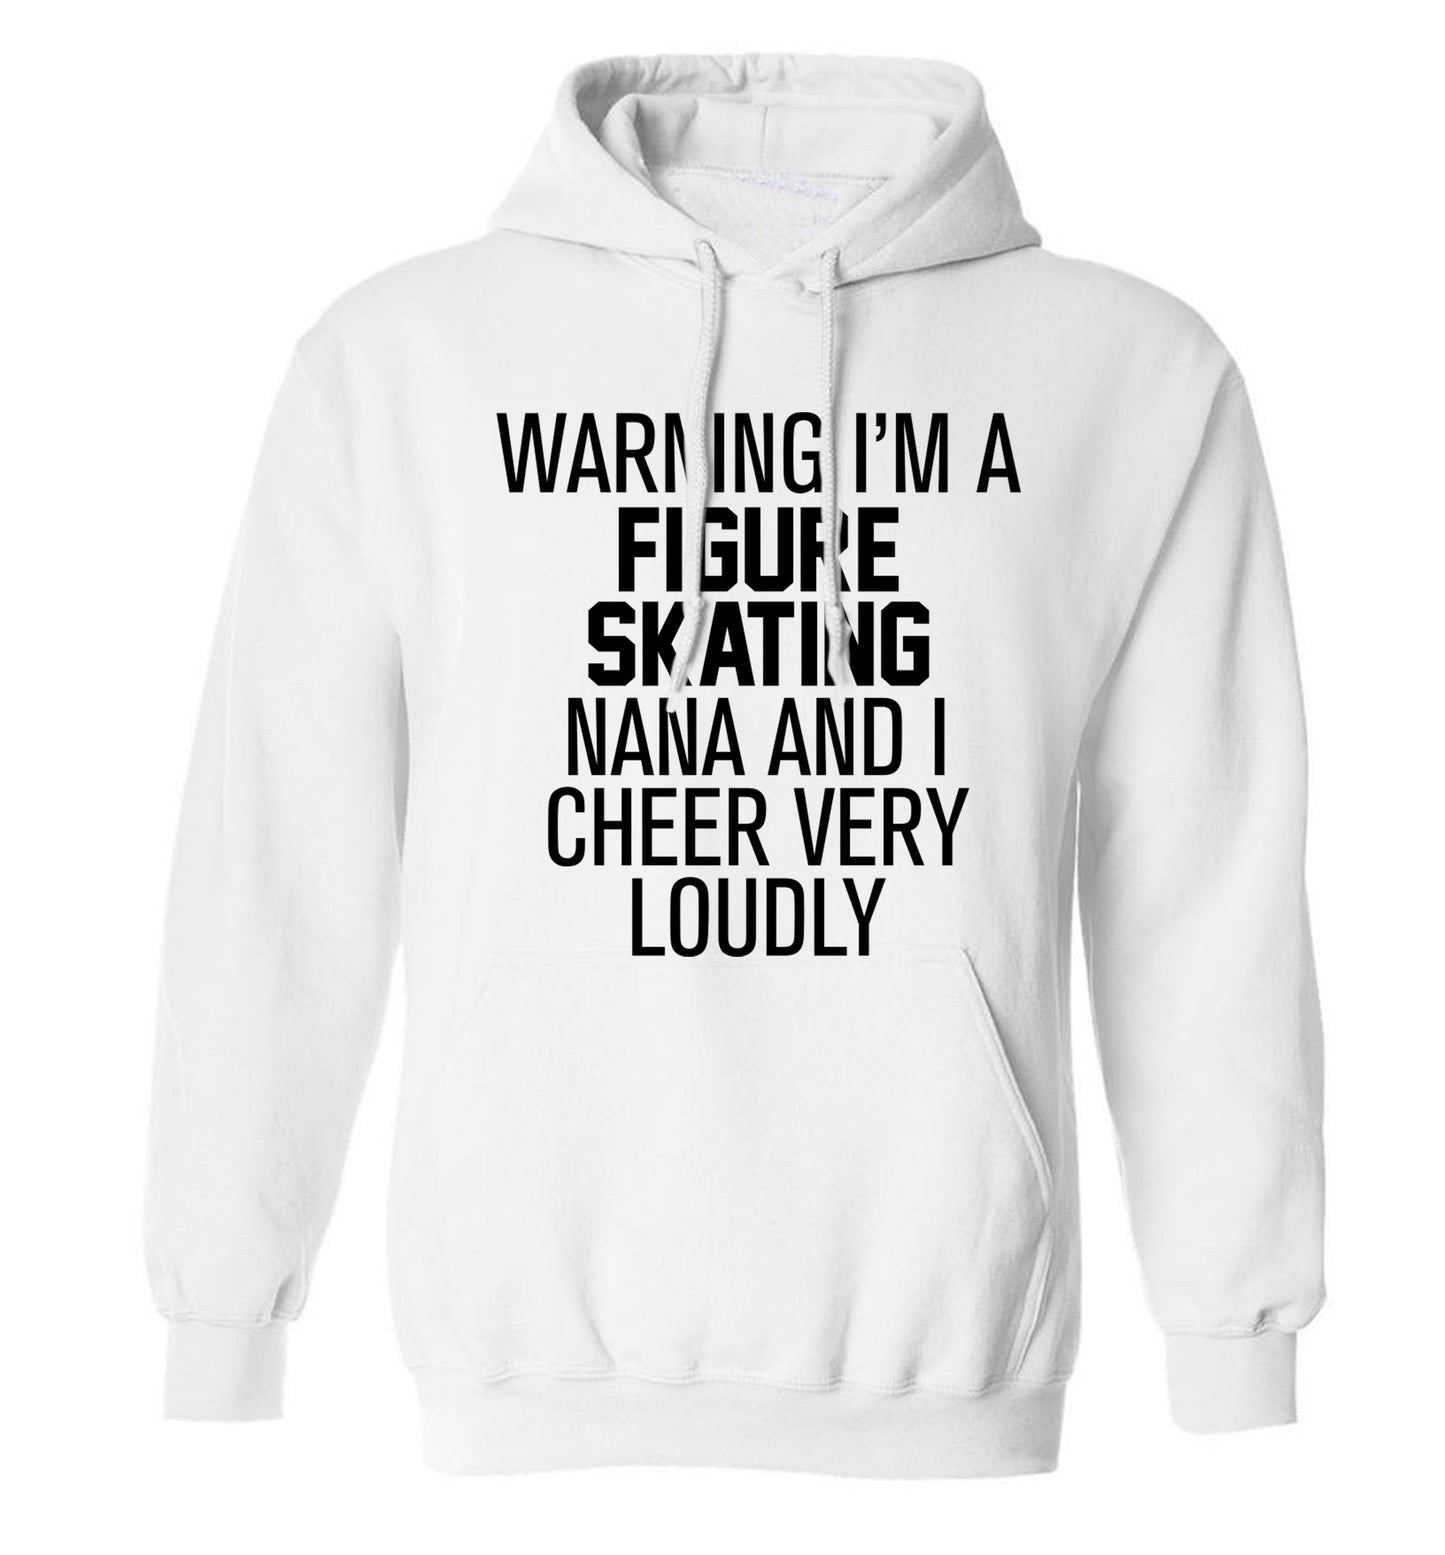 Warning I'm a figure skating nana and I cheer very loudly adults unisexwhite hoodie 2XL